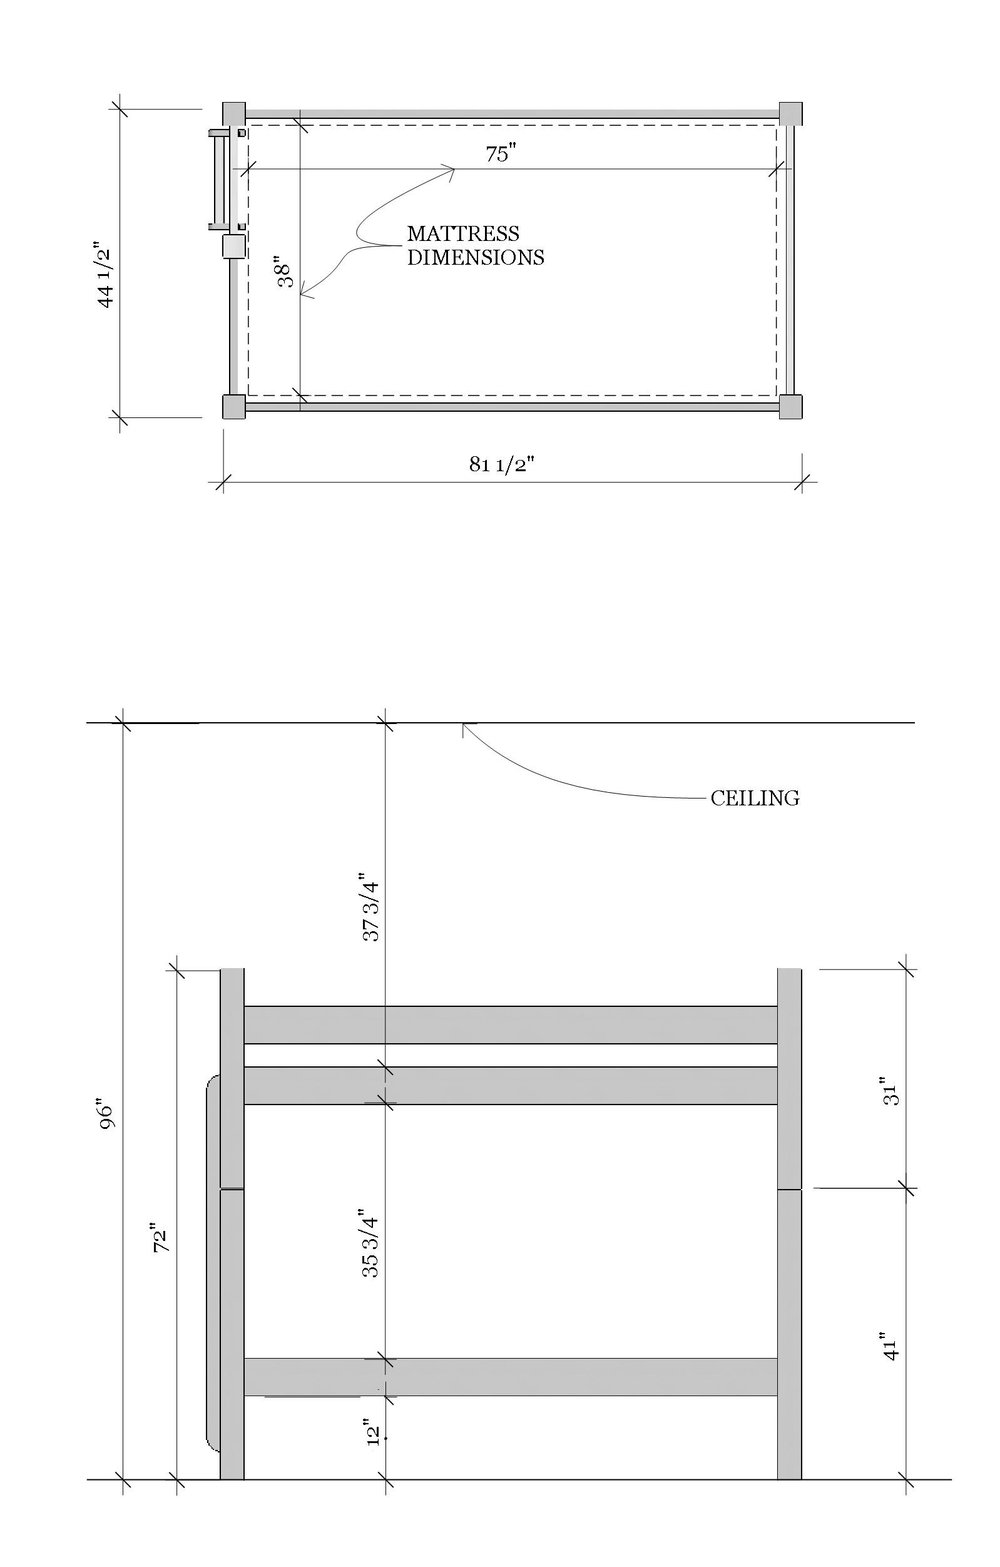 Dimensions, Typical Bunk Bed Dimensions